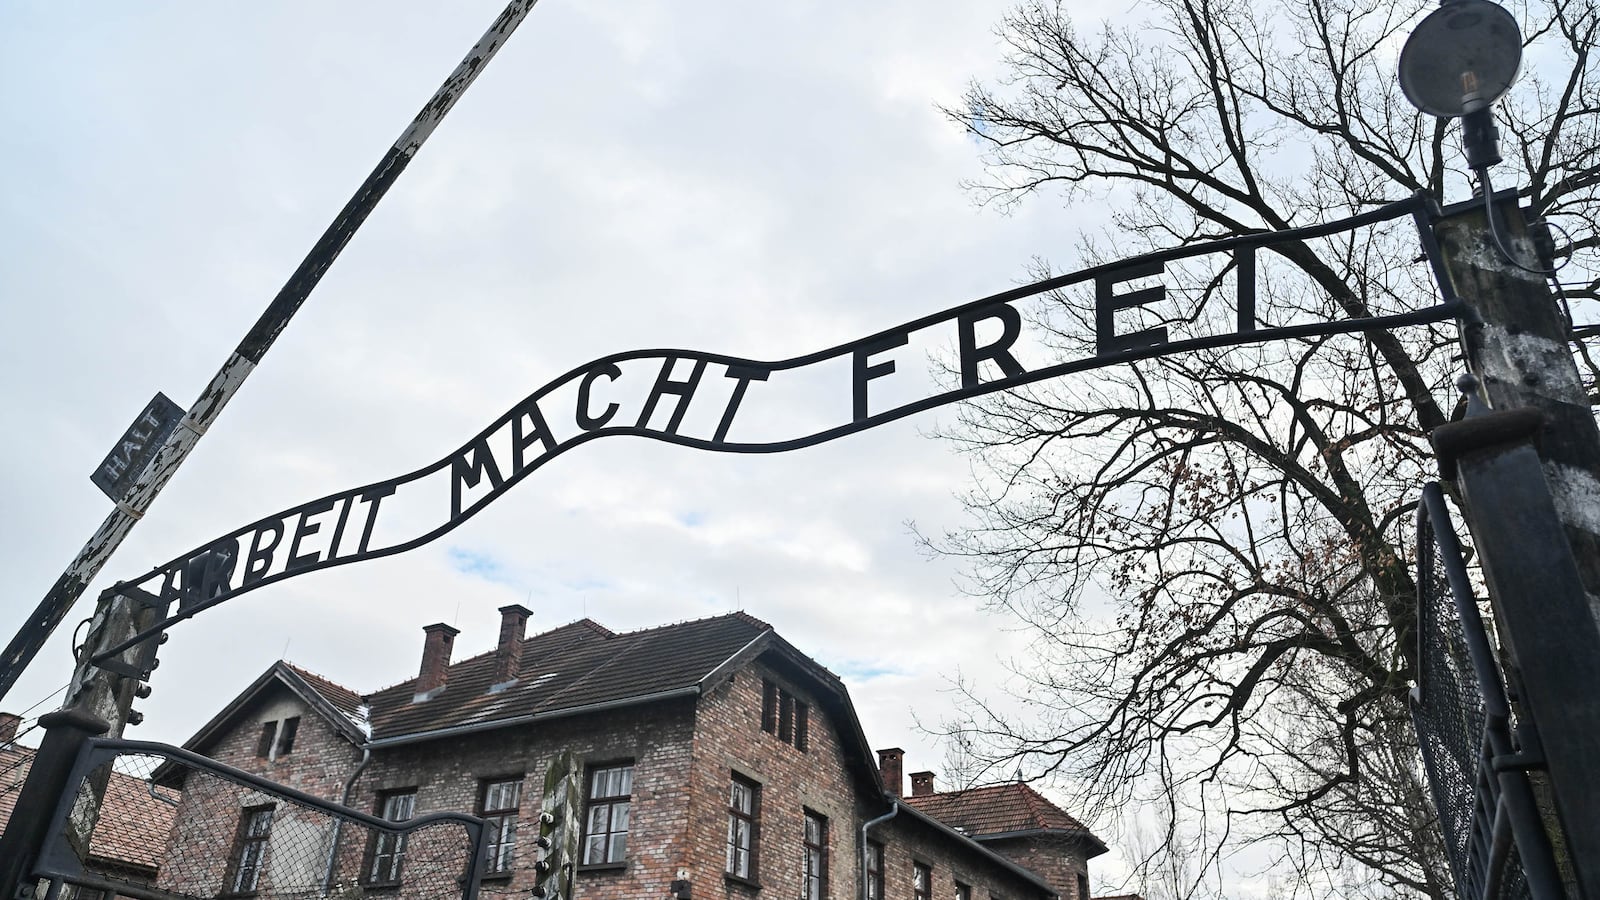 A metal gate with a sign that reads 'Arbeit Macht Frei' (Work Sets You Free) stands above a tan brick building in the background with trees and a cloudy sky.